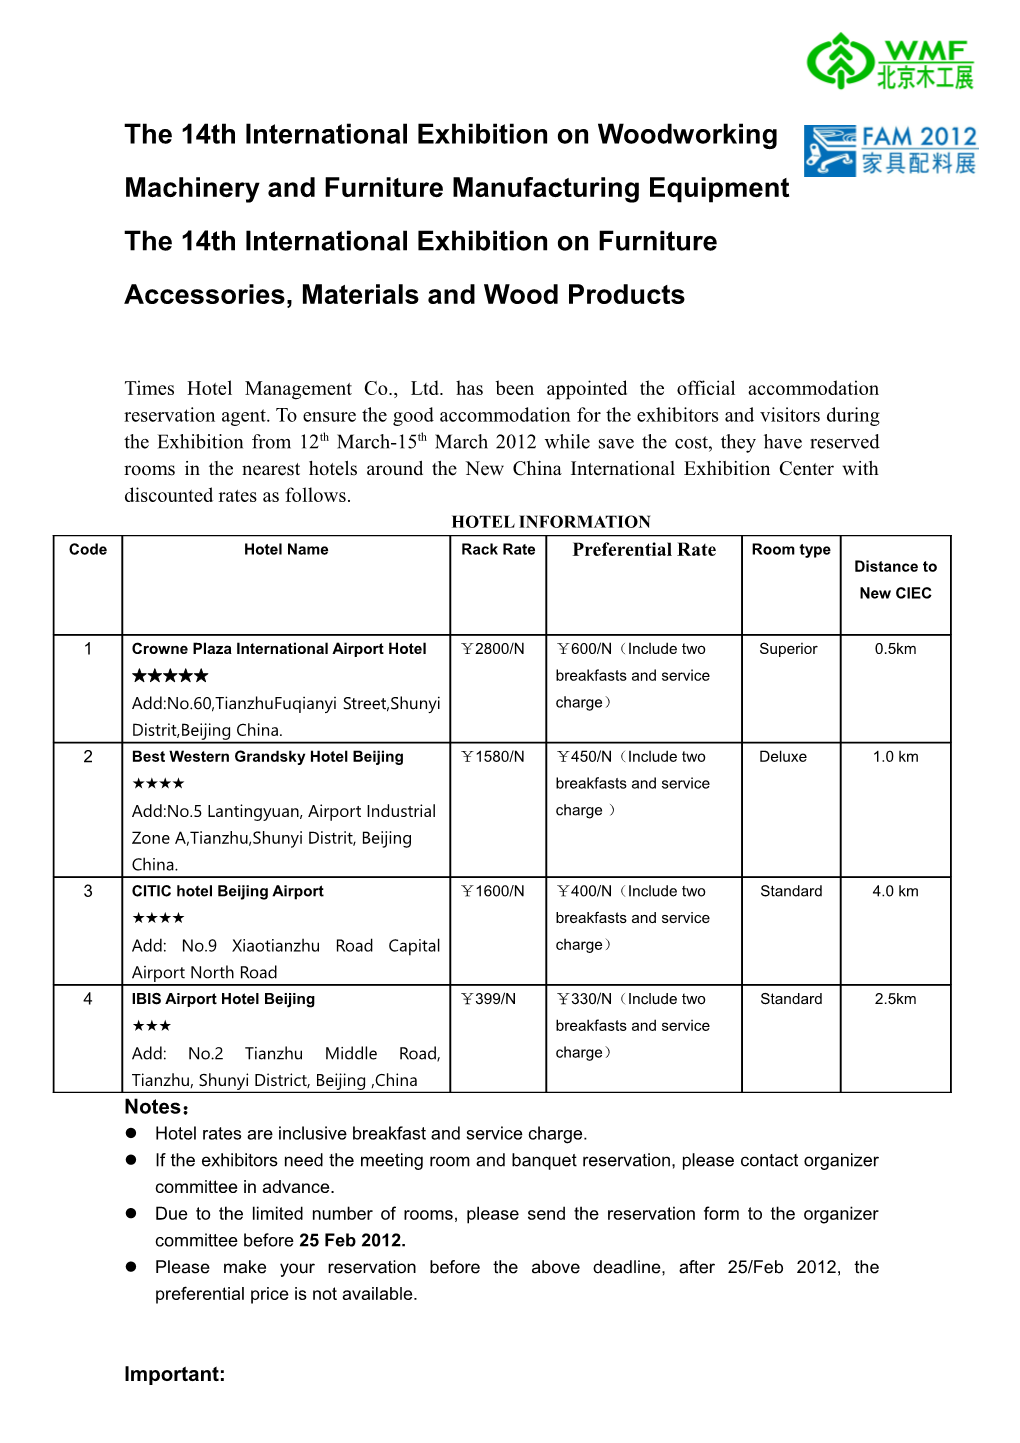 The 14Th International Exhibition on Furniture Accessories, Materials and Wood Products